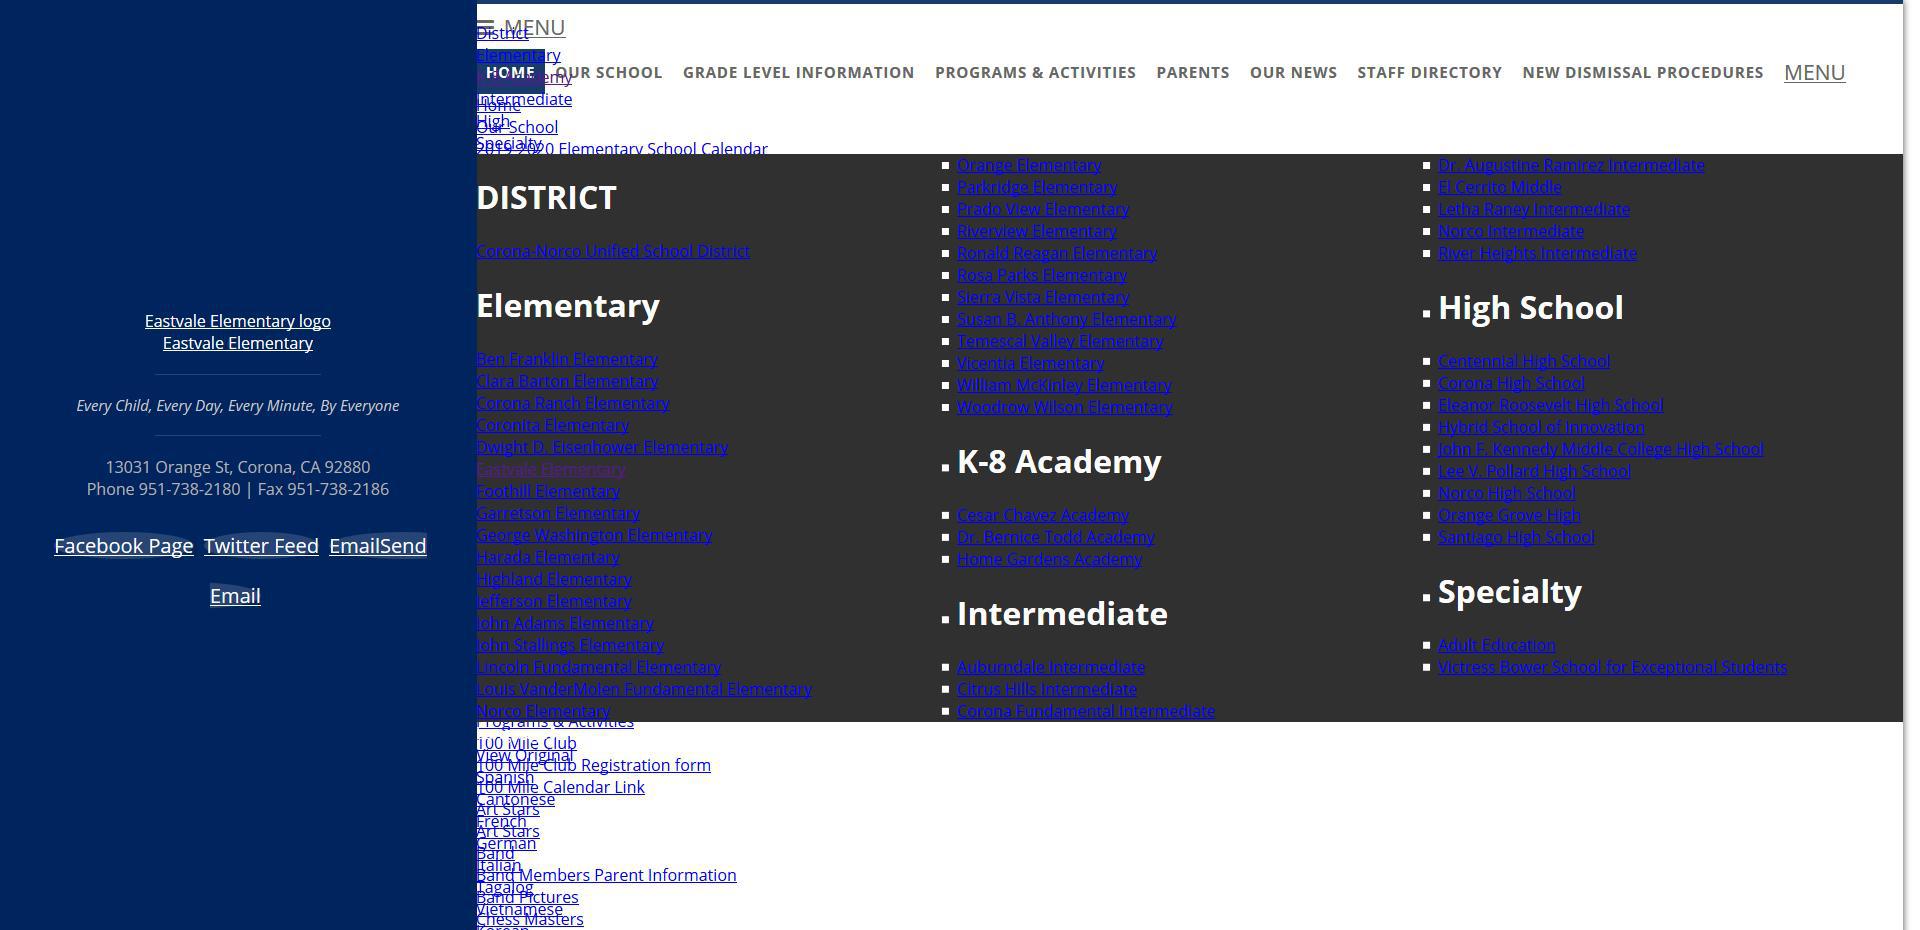 eastvale.cnusd.k12.ca.us site is not usable · Issue 36035